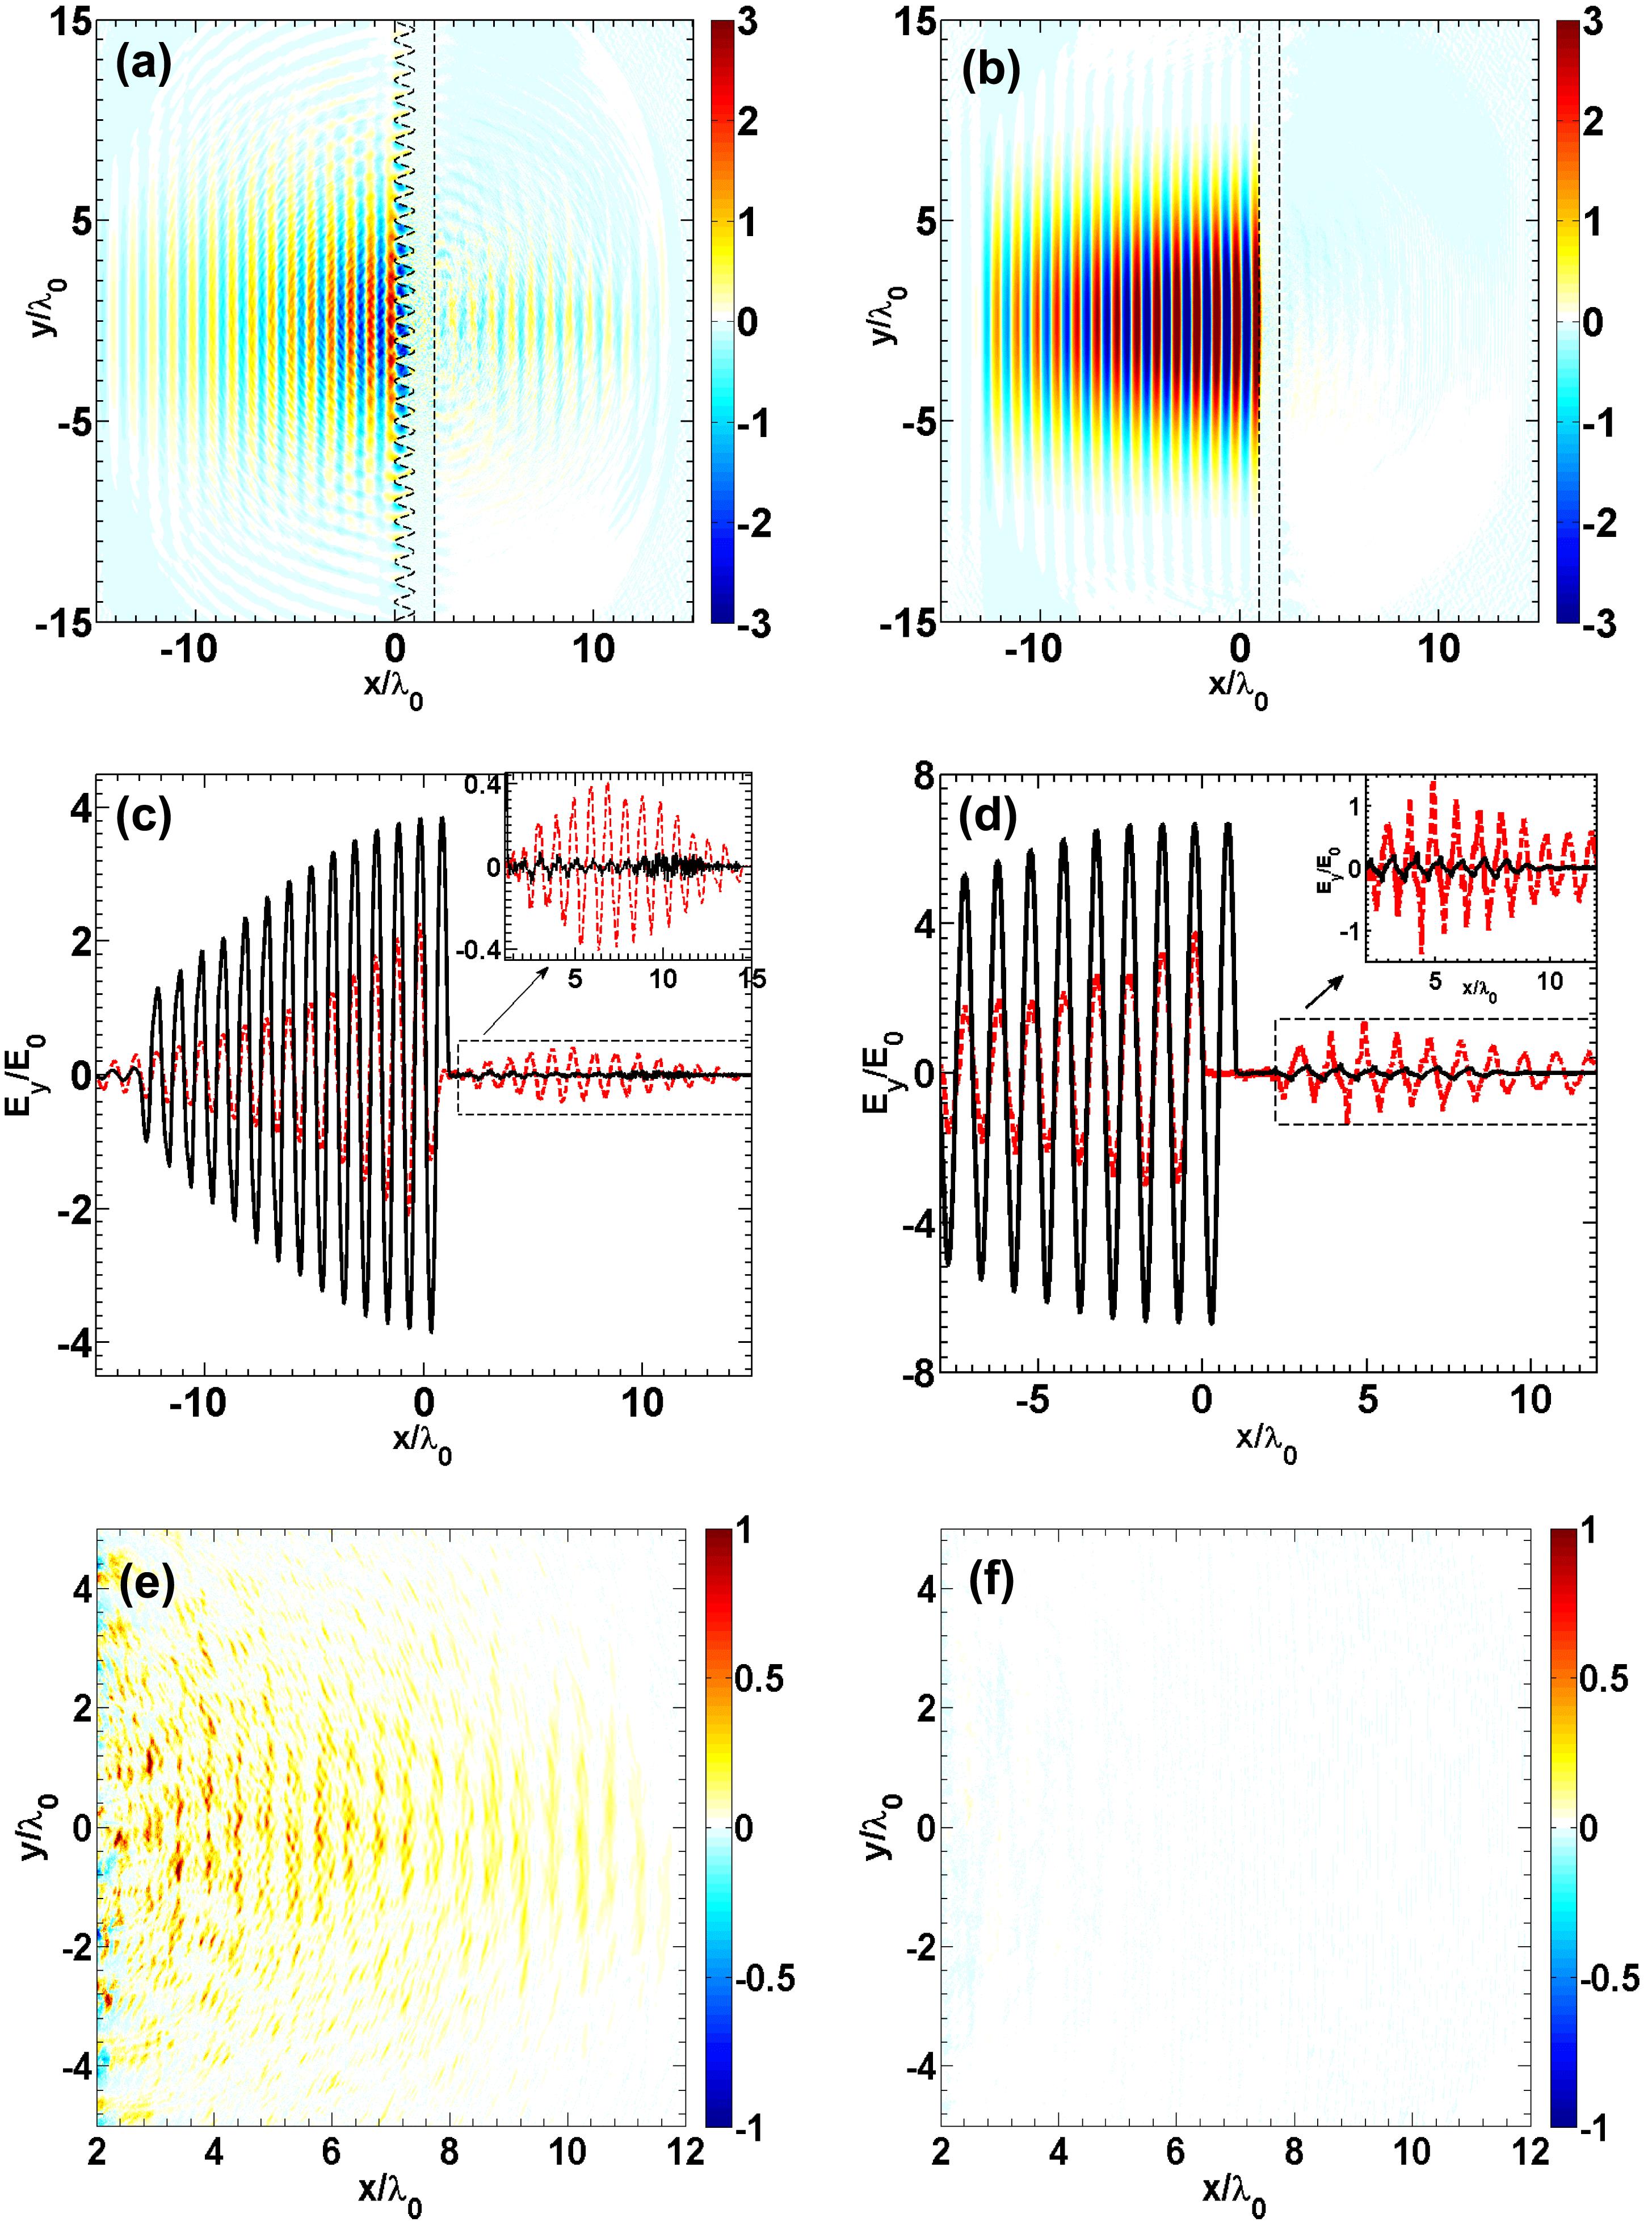 The electric field $E_{y}$ and the Poynting flux $S_{x}=E_{y}B_{z}$ at $t=30T_{0}$ ($t=25T_{0}$ for (d)). (a) and (b) are the distributions of $E_{y}$ for the pre-structured and flat targets, respectively. (c) and (d) are the distributions along the $x$ axis for the pre-structured and flat targets, respectively. (e) and (f) are the distributions of $S_{x}$ behind the target for the pre-structured and flat targets, respectively. In (a)–(c), (e) and (f), the laser normalized vector potential is $a_{0}=3$ and the electron density is $n_{e}=25n_{c}$. In (d), the laser normalized vector potential is $a_{0}=5$ and the electron density is $n_{e}=900n_{c}$. In (c) and (d), the red dashed line and the black solid line represent the pre-structured and flat target cases, respectively. In this figure, $E_{0}=m_{e}\unicode[STIX]{x1D714}_{0}c/e\approx 3.22\times 10^{12}~\text{V}/\text{m}$. The electric fields in (a) and (b) are both normalized by $E_{0}$.